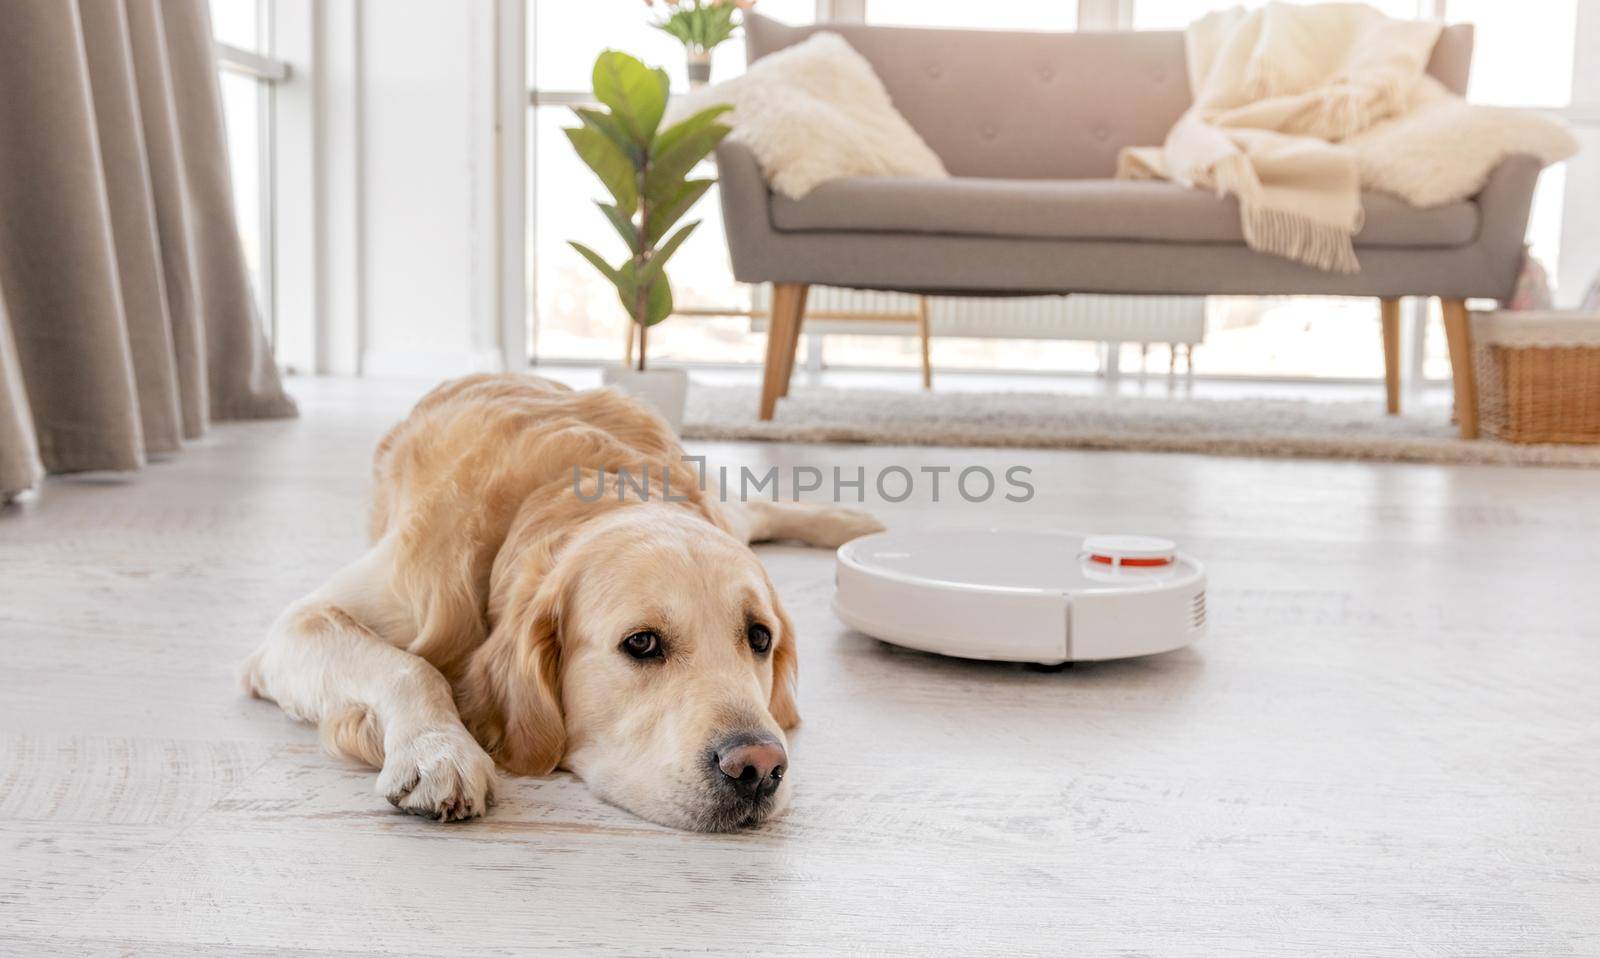 Cute golden retriever dog lying on the floor at home while robot vacuum cleaner works close to him